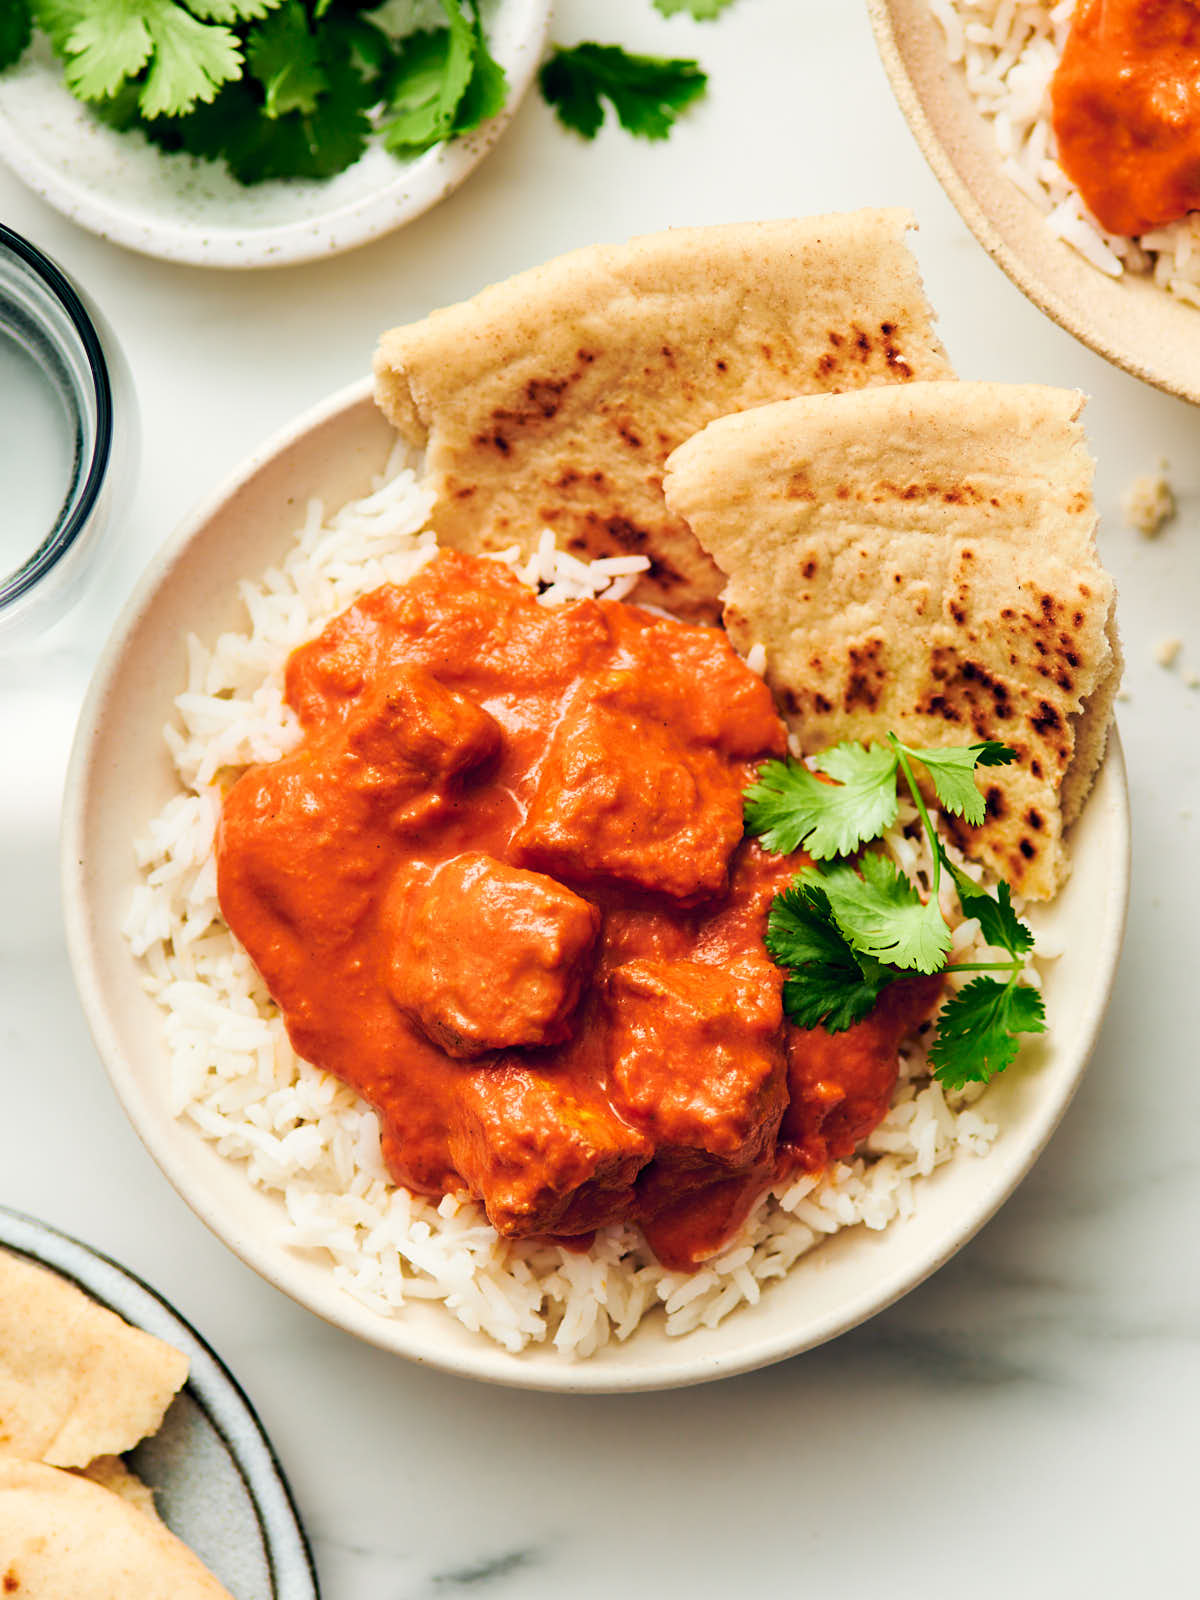 Vegetarian Butter Chicken in a bowl with rice, naan, and cilantro.